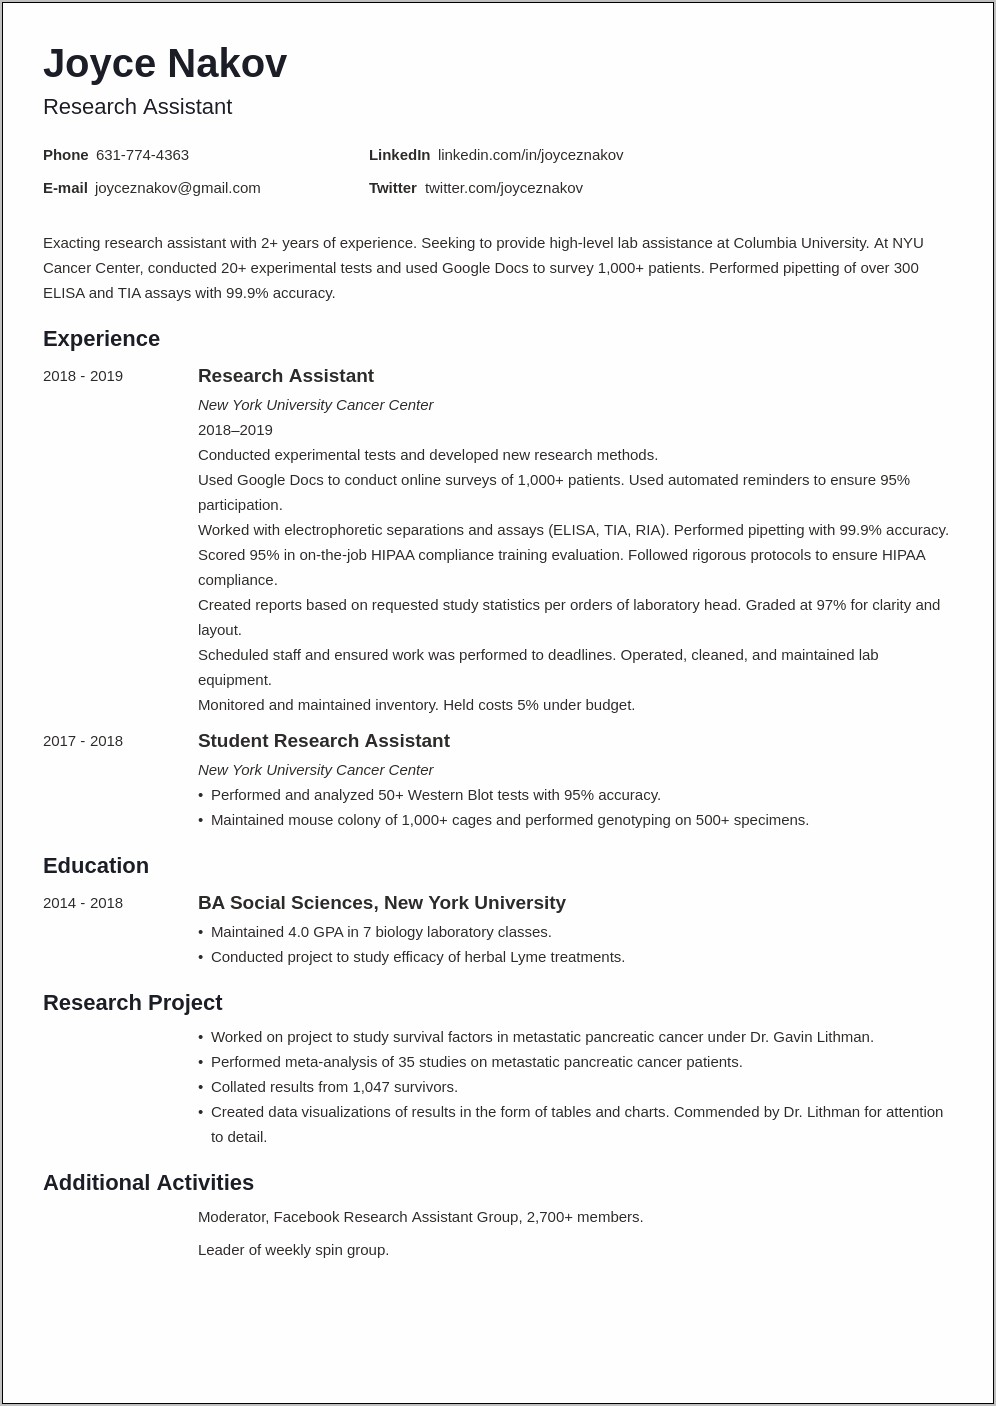 Resume Objective For Research Position